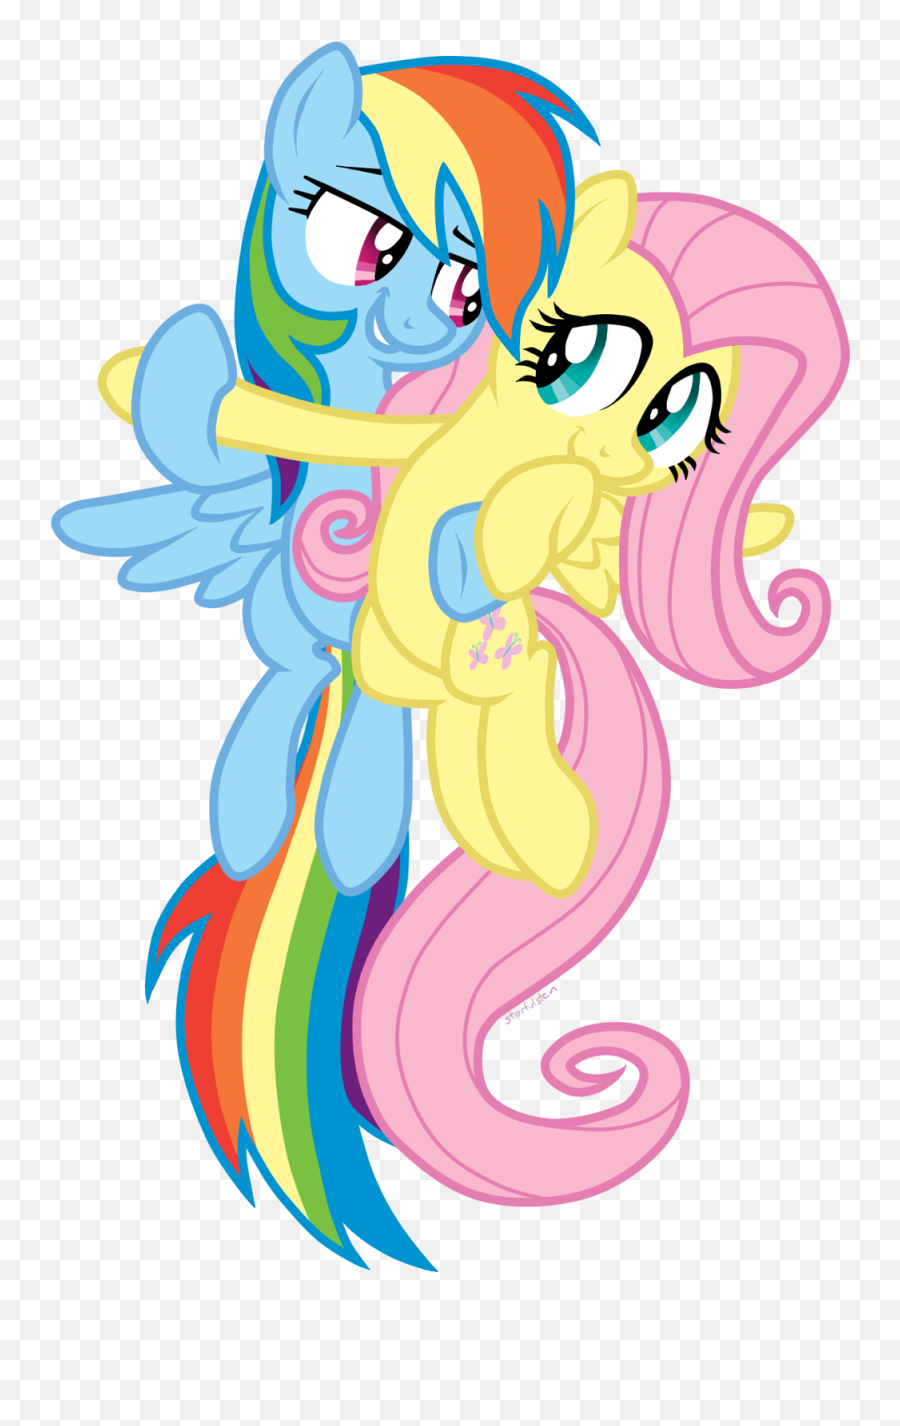 Hugging Clipart Transparent - Fluttershy And Rainbow Dash Fluttershy Kiss Rinbow Dash Emoji,Hugging Clipart